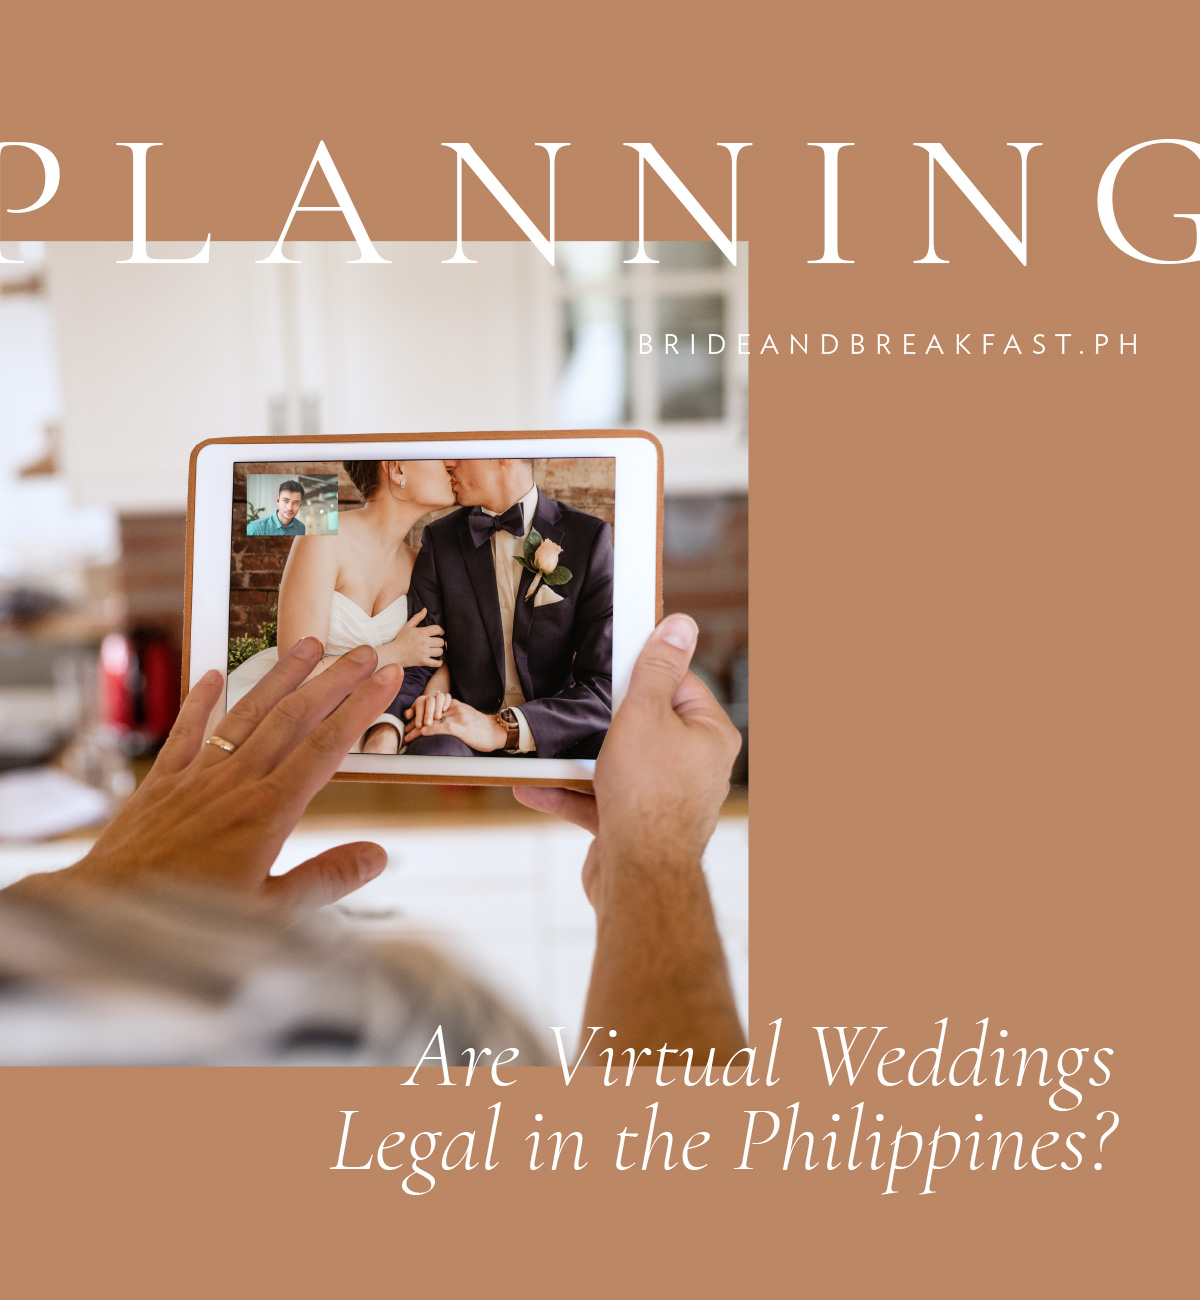 Are Virtual Weddings Legal in the Philippines?